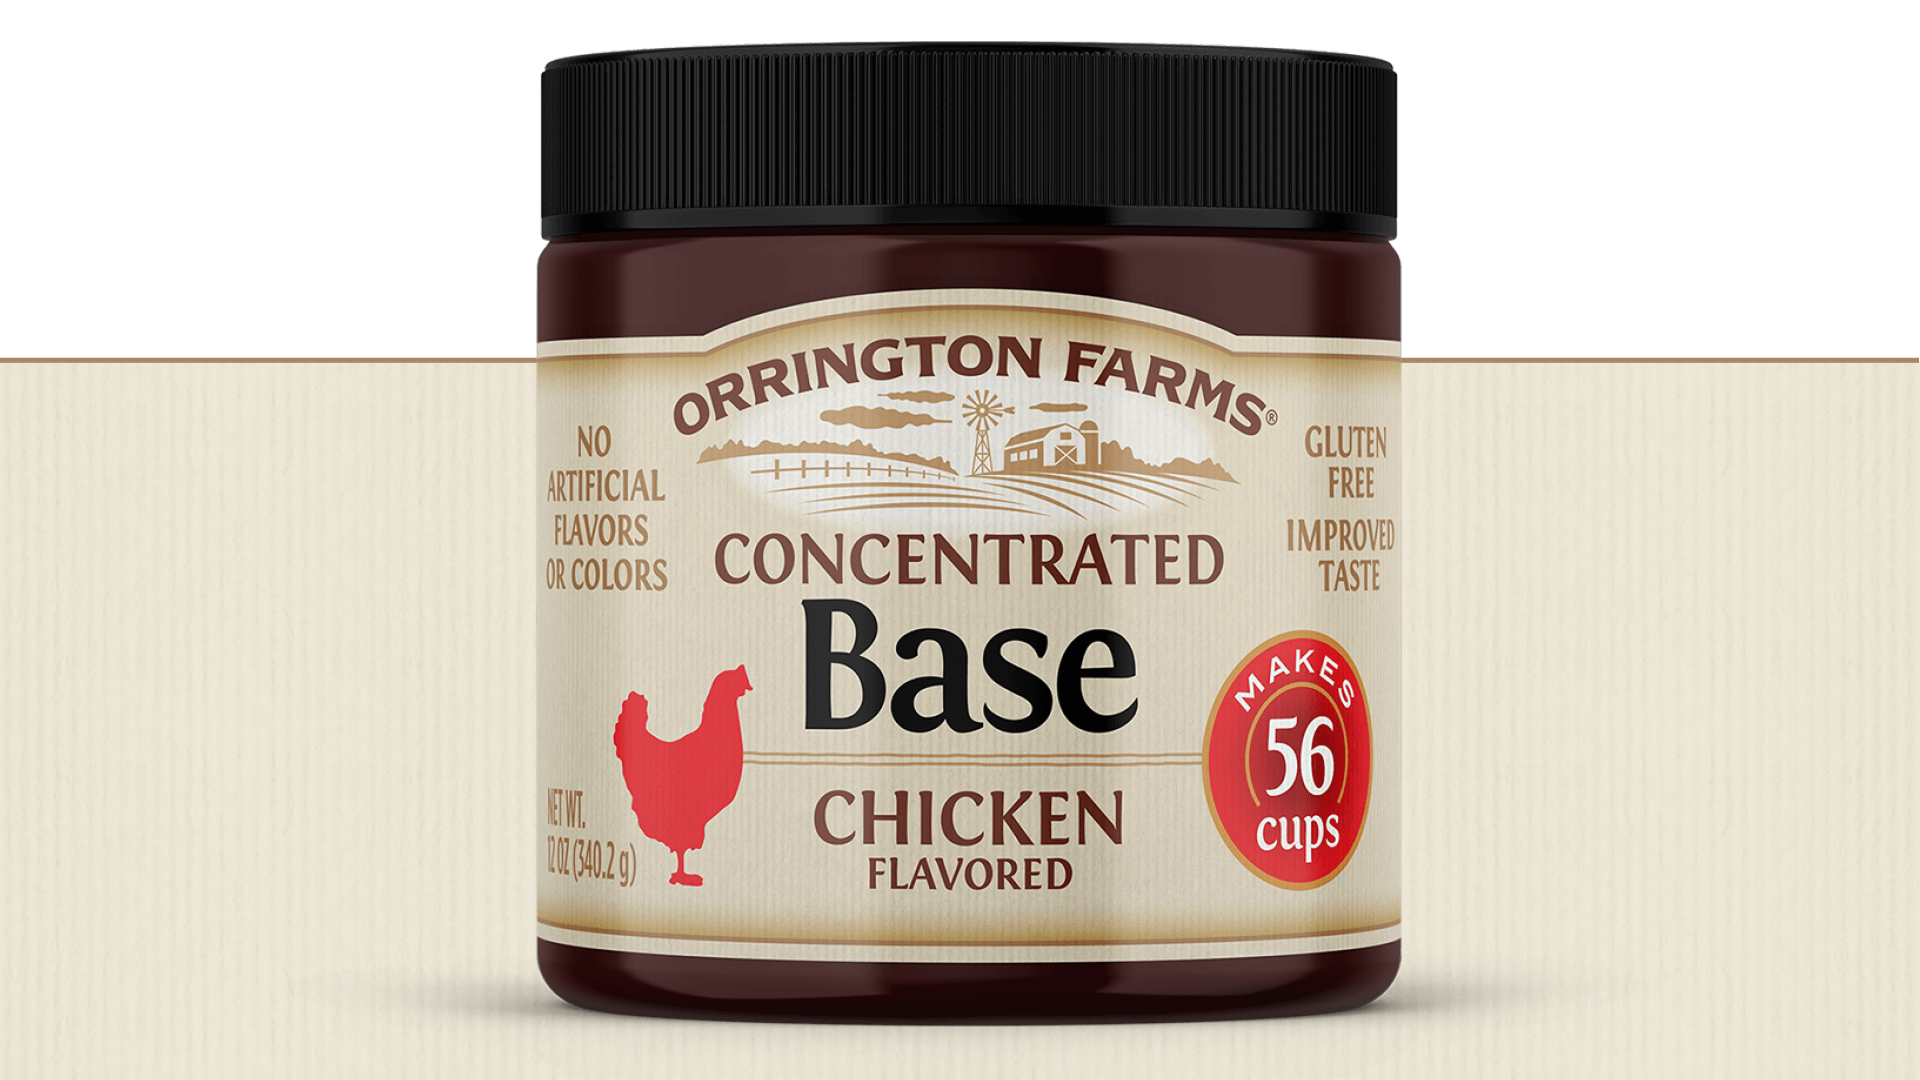 Orrington Farms Concentrated Chicken Flavored Base Jar